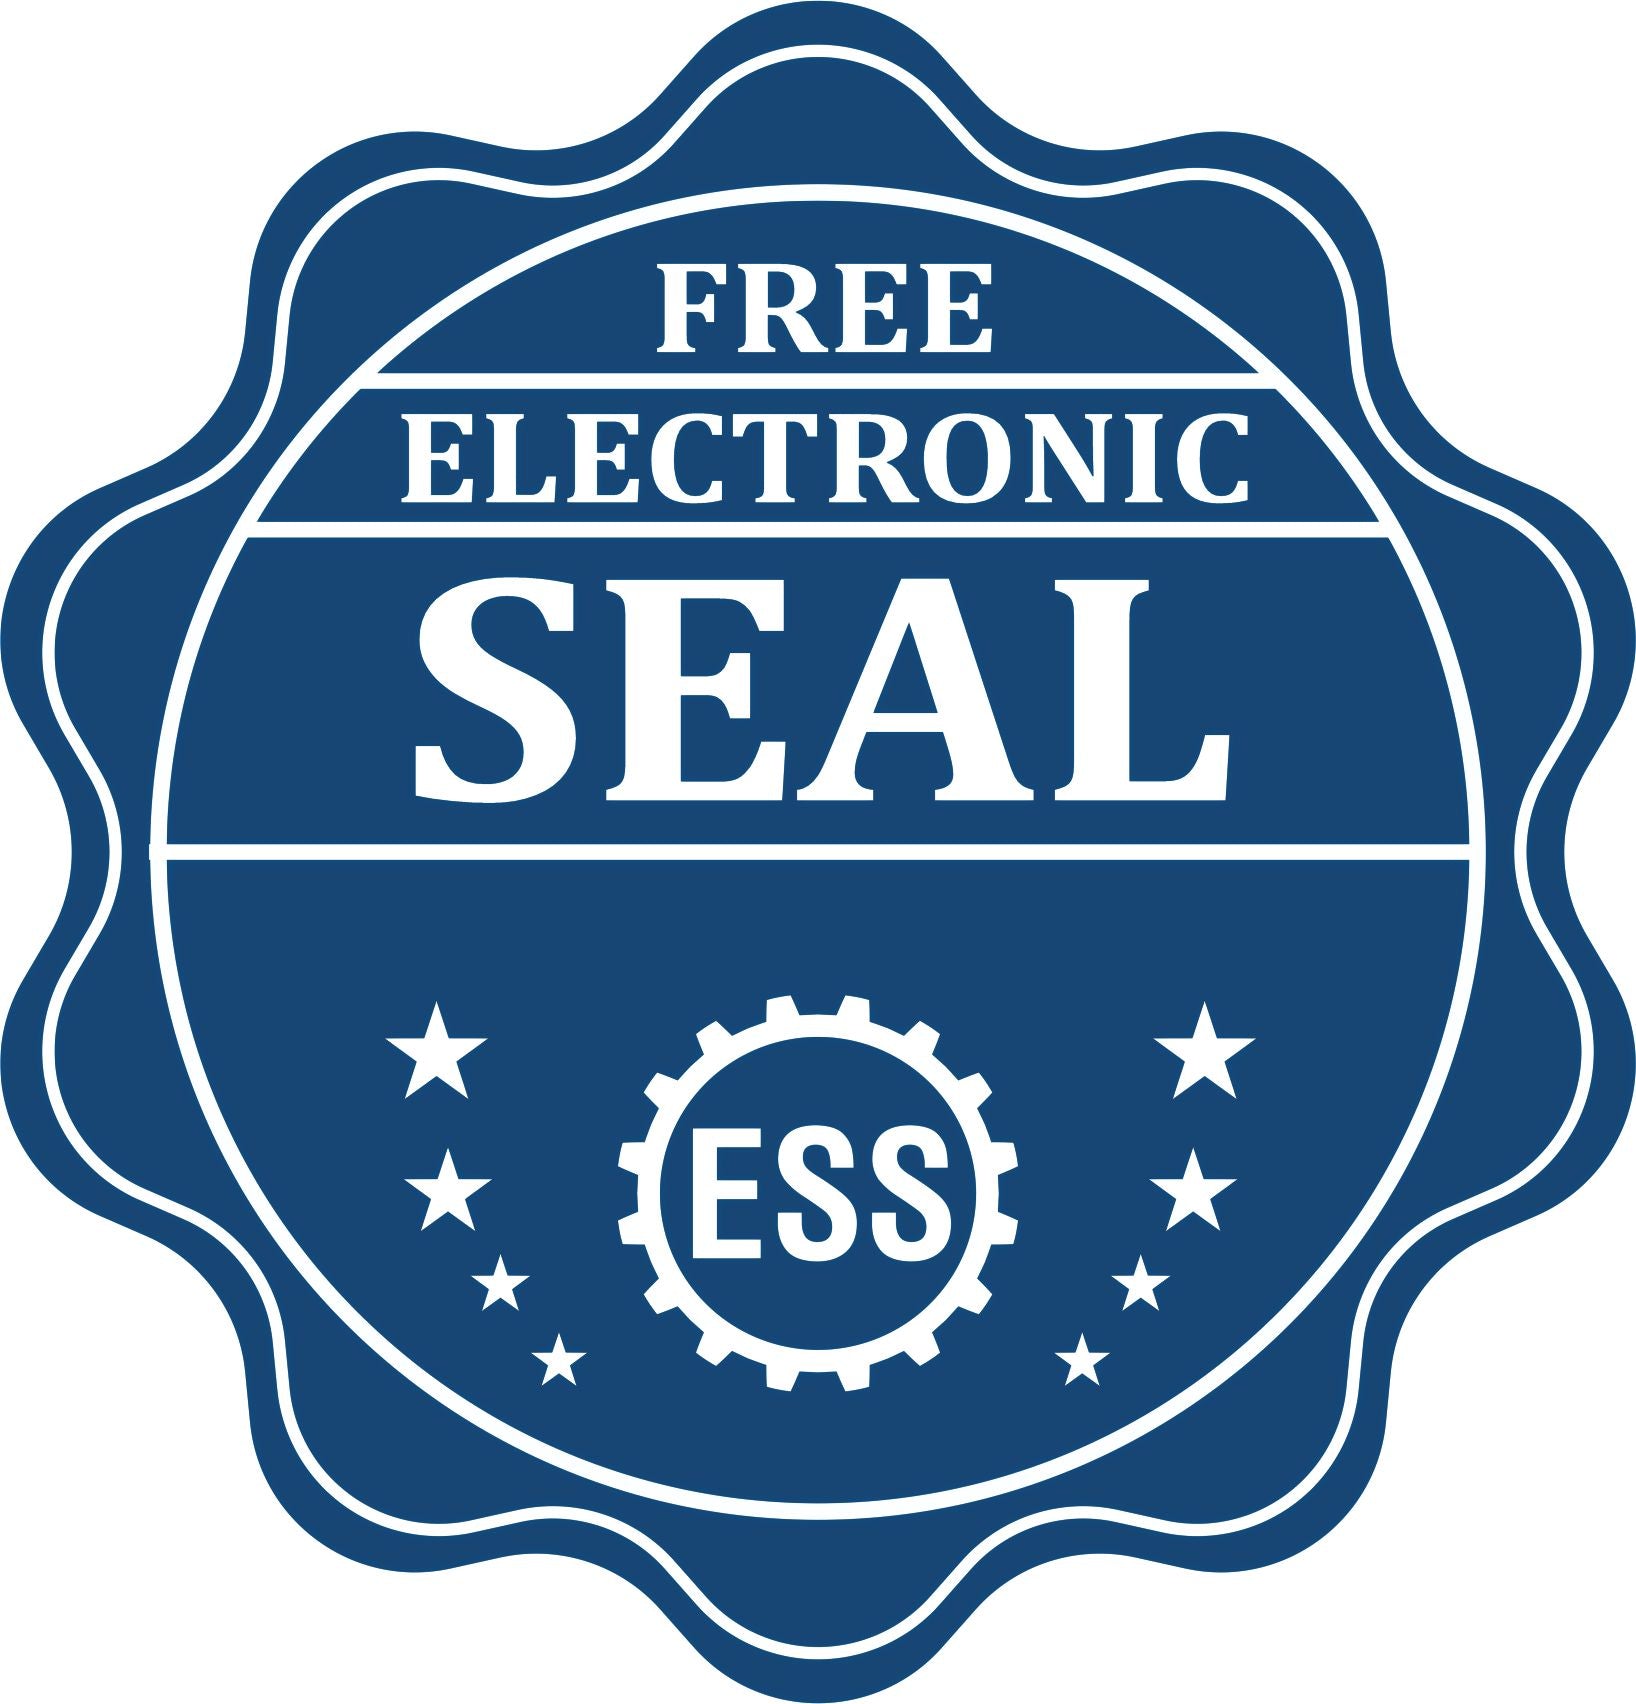 A badge showing a free electronic seal for the State of West Virginia Architectural Seal Embosser with stars and the ESS gear on the emblem.